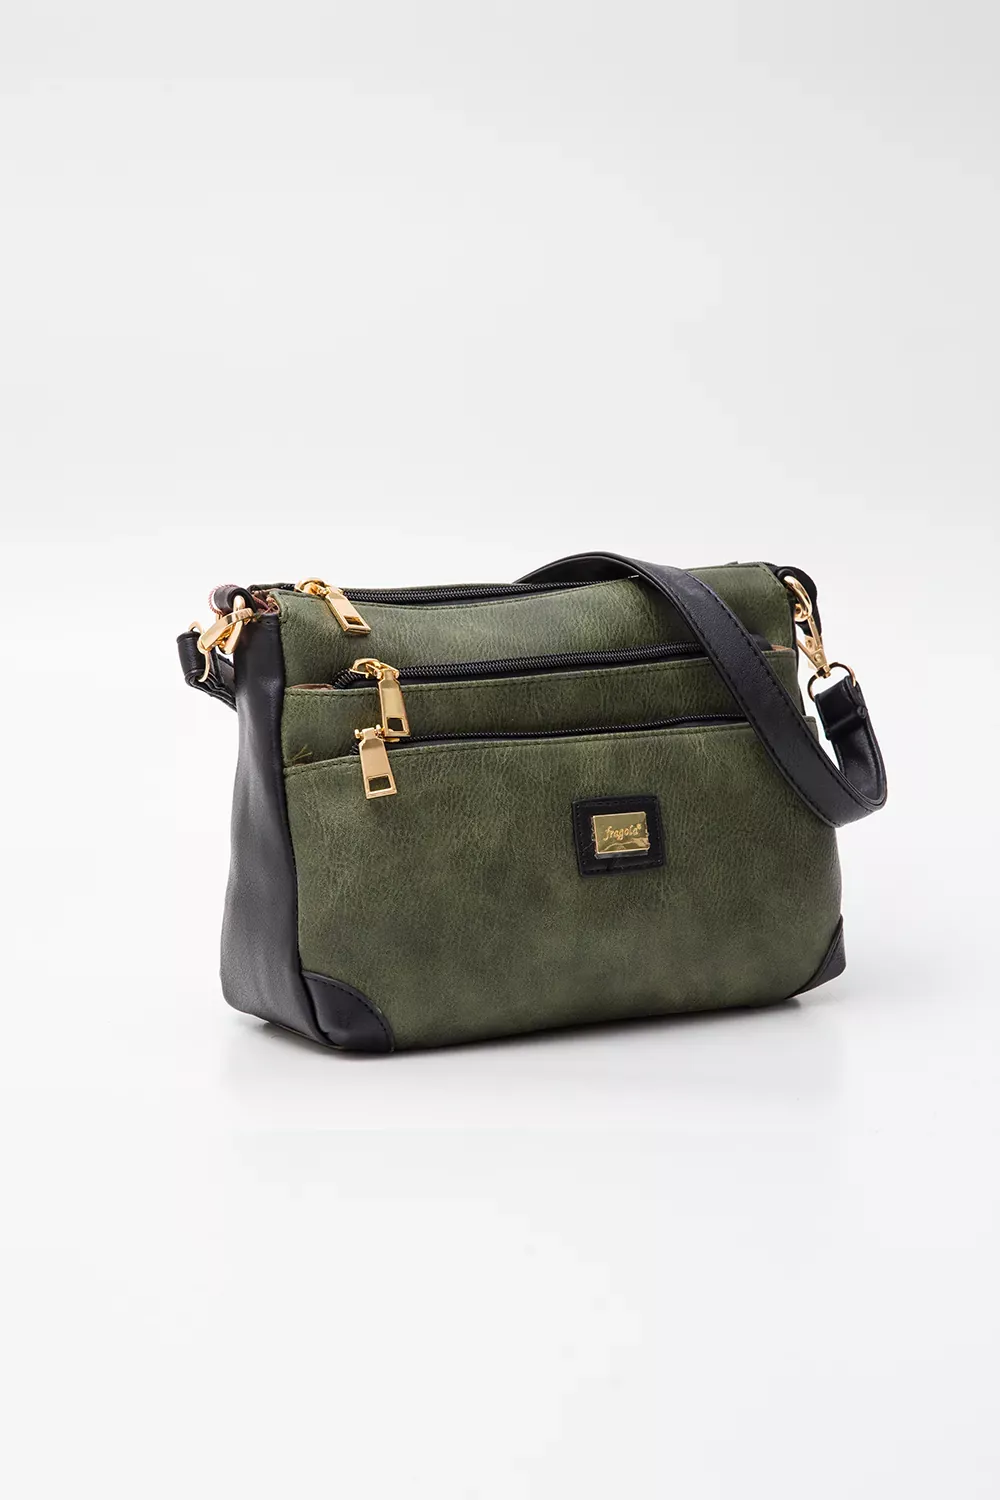 fh27 olive